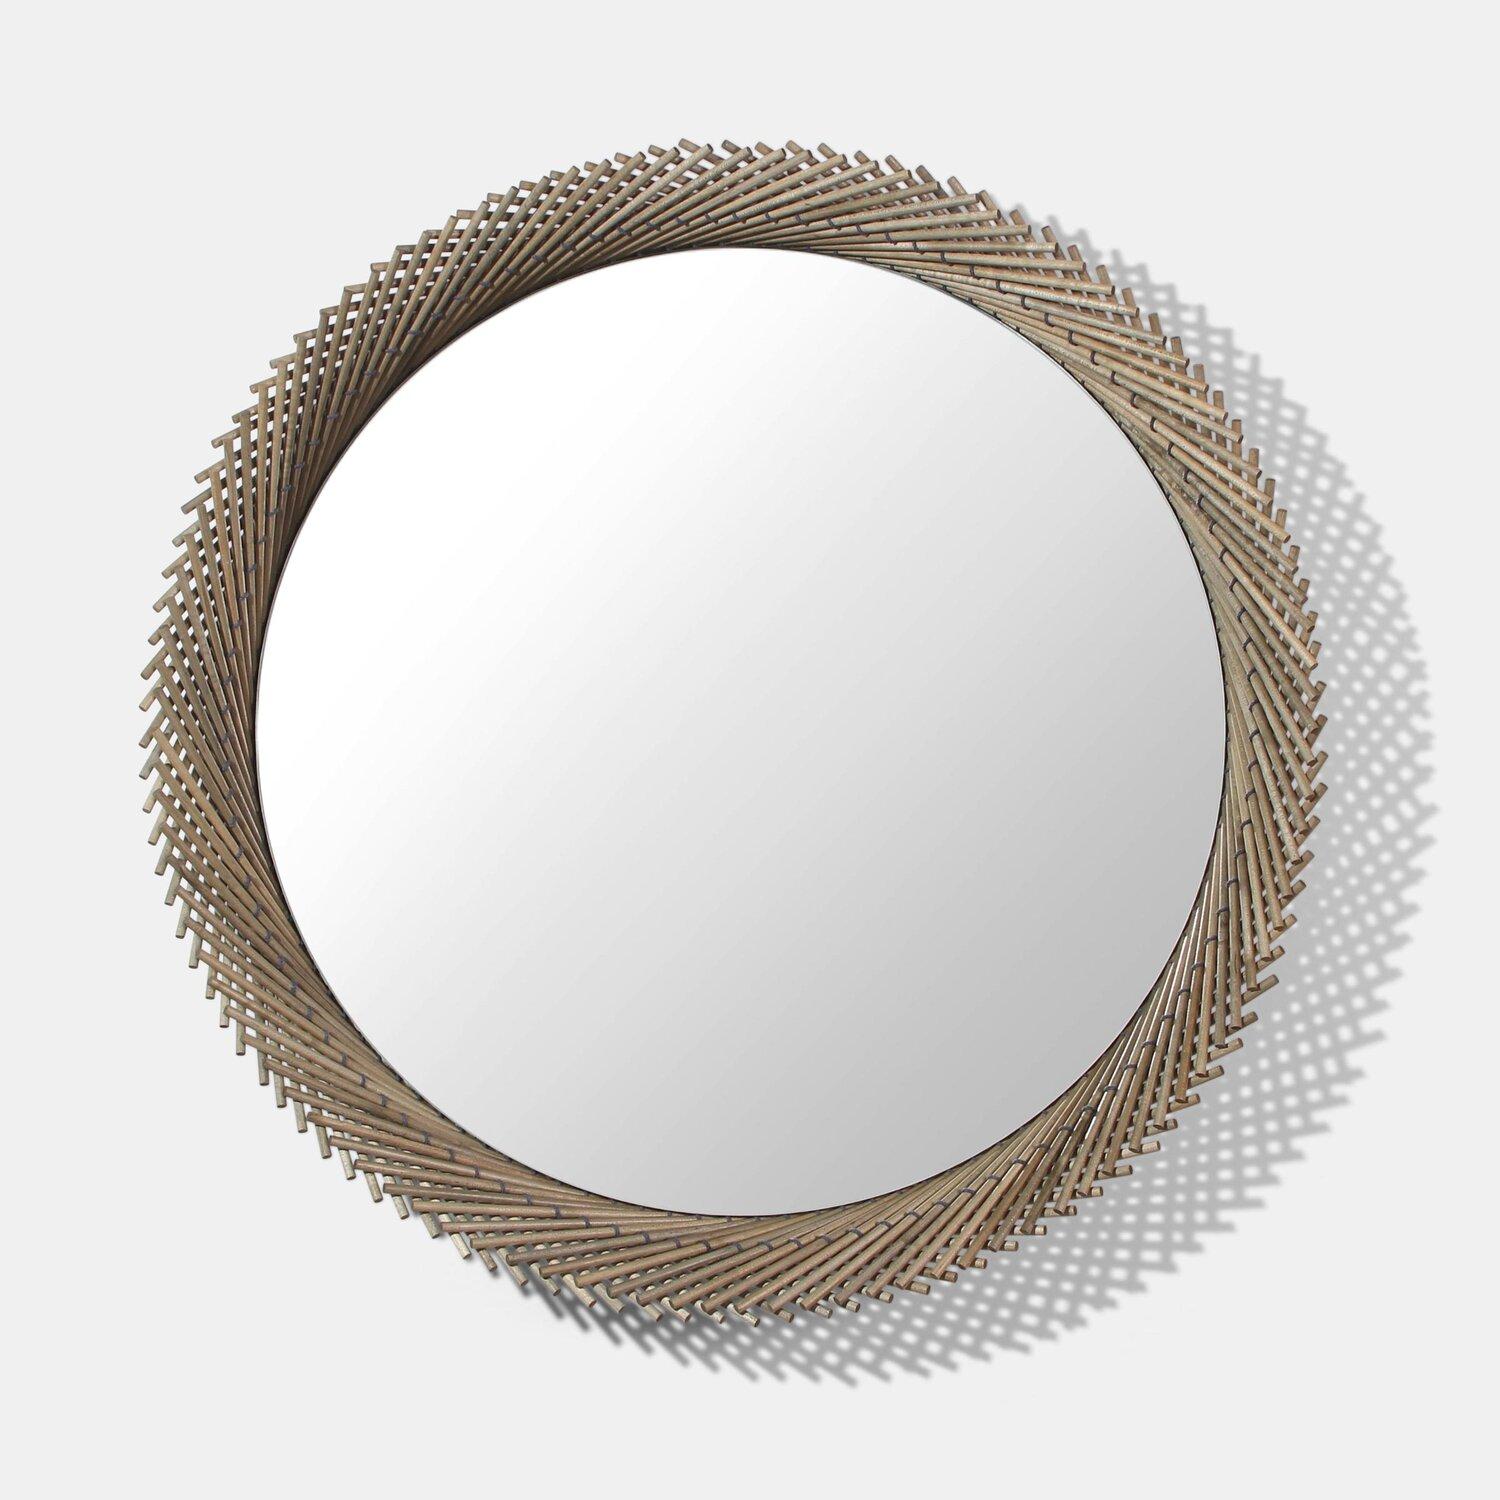 Mooda maple round mirror 18´ by Indo Made
One of a kind
Dimensions: Ø 88.9 x 10,2 cm
Materials: Maple, clear mirror

Also available in other dimensions and materials. Please contact us.
Ø options: 58,4 cm, 73.7 cm, 88.9 cm and 106.7